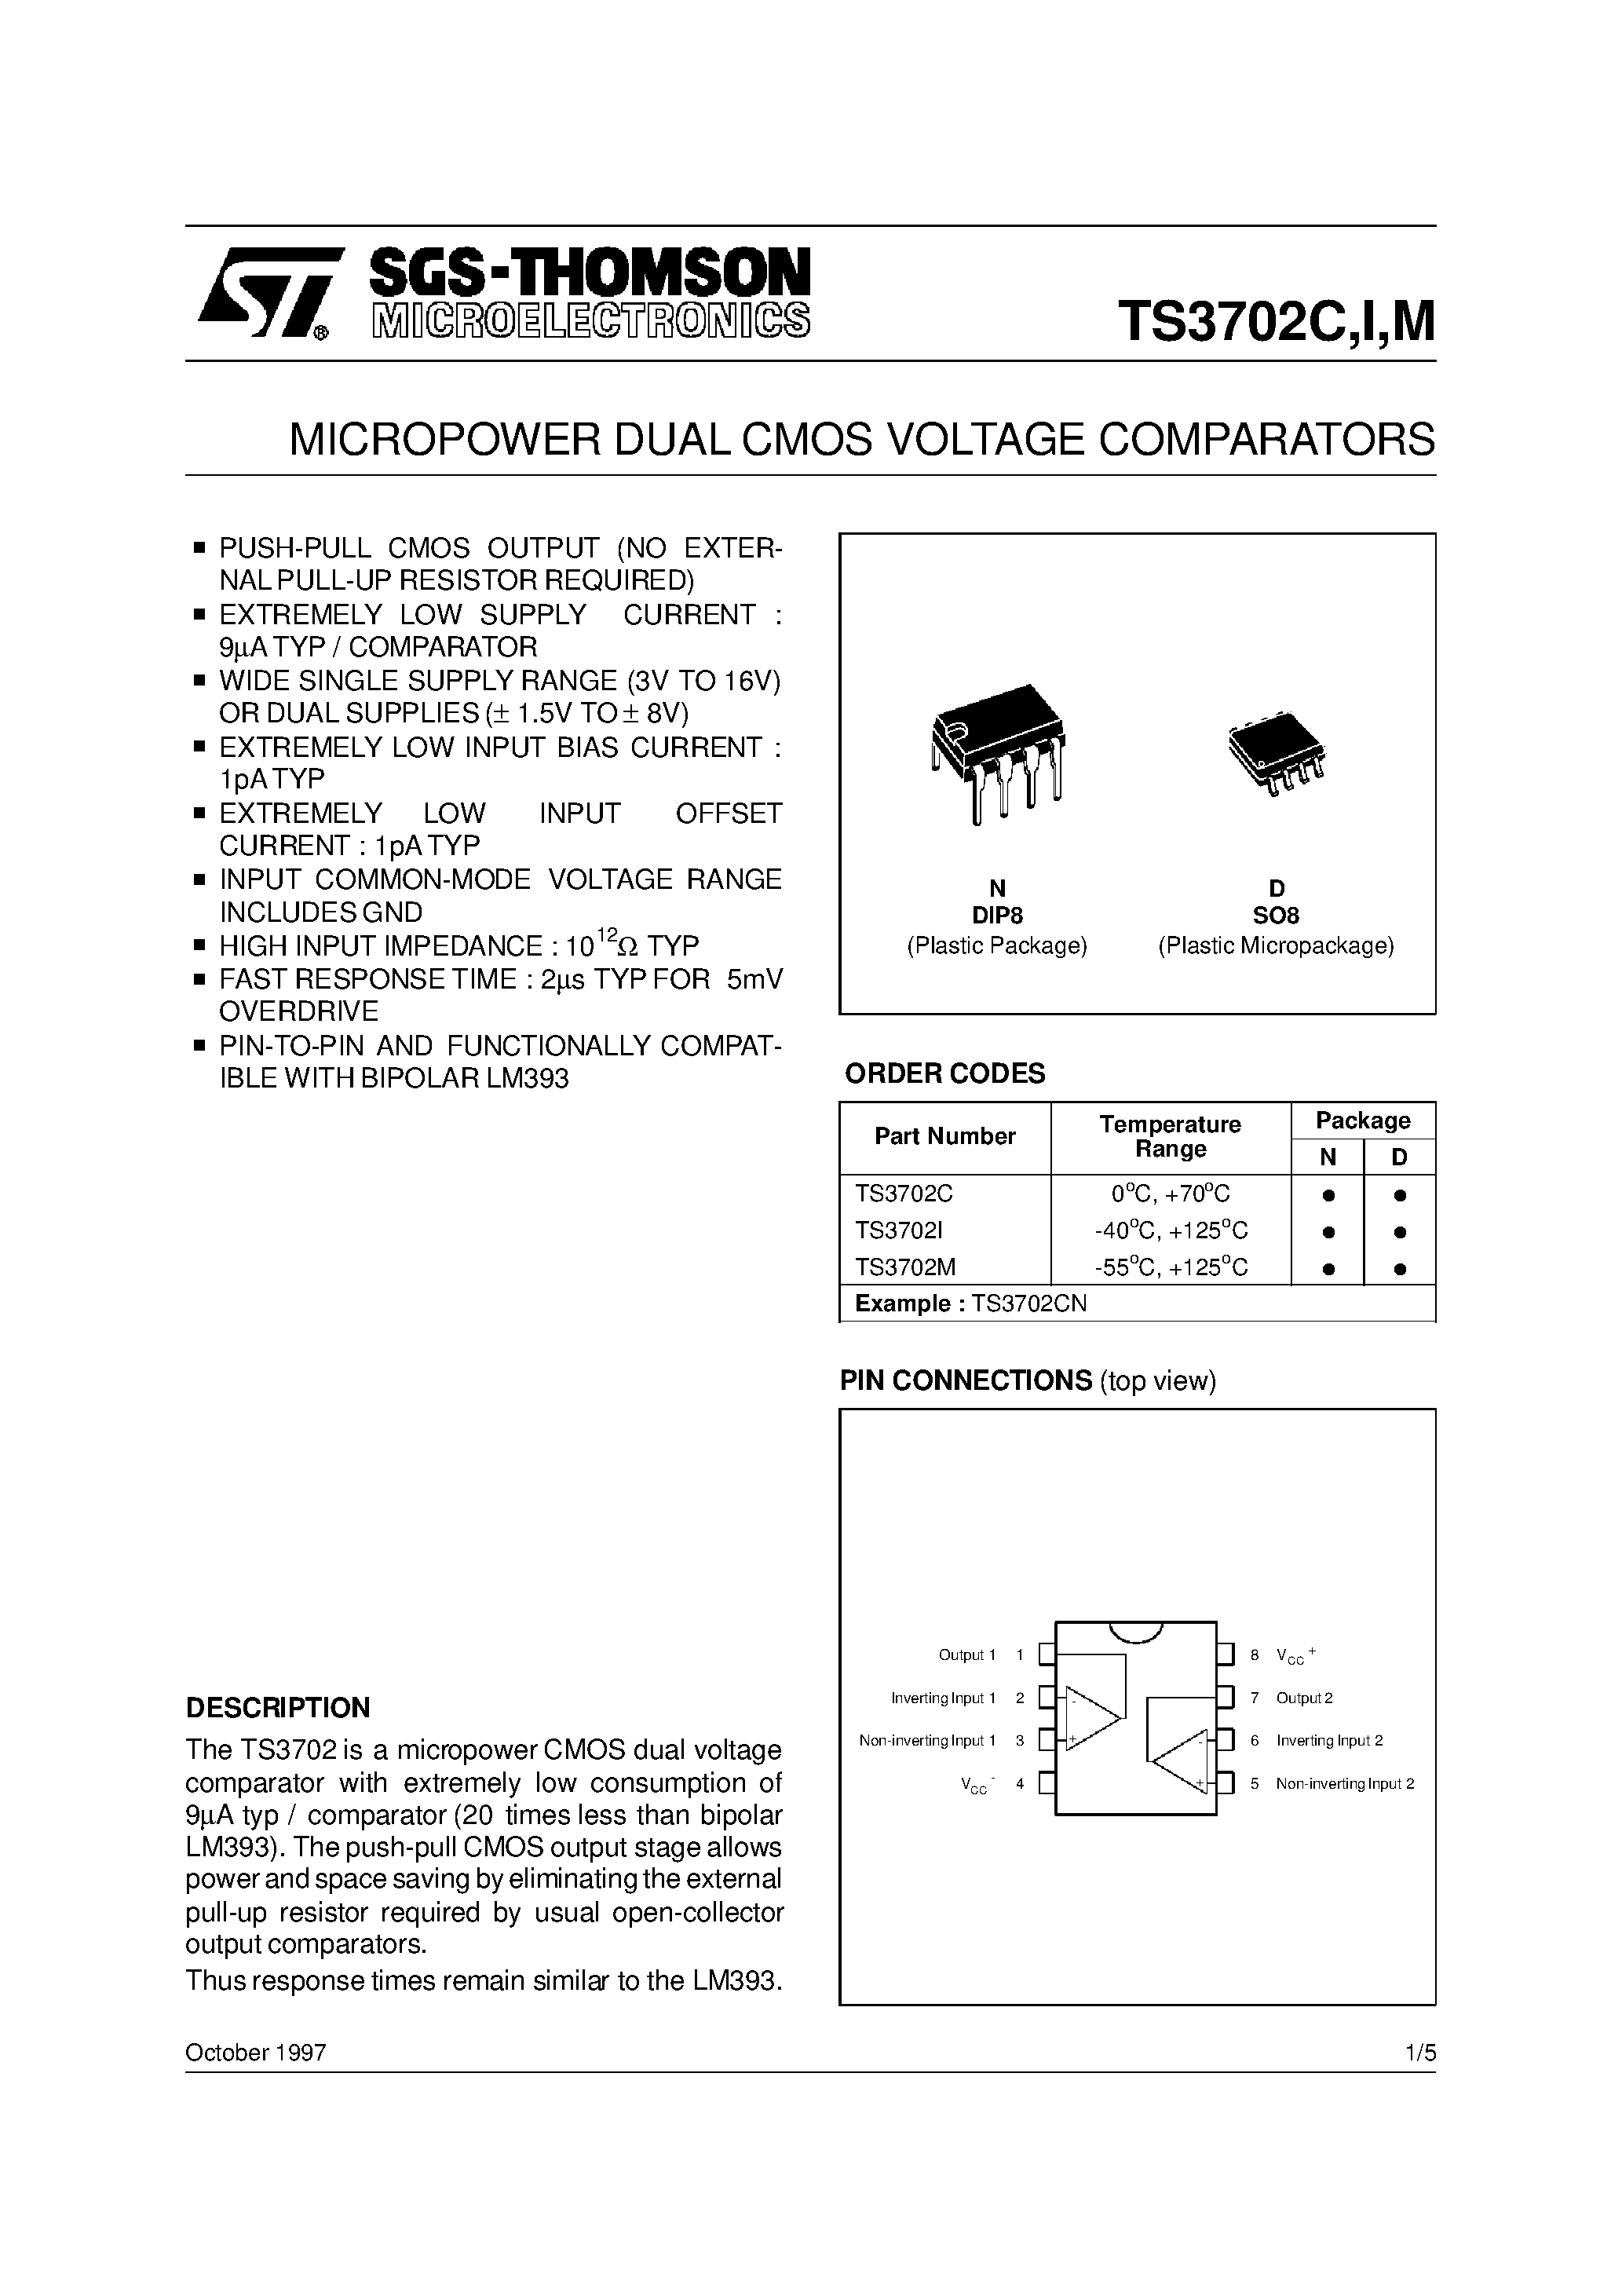 Datasheet TS3702 - MICROPOWER DUAL CMOS VOLTAGE COMPARATORS page 1